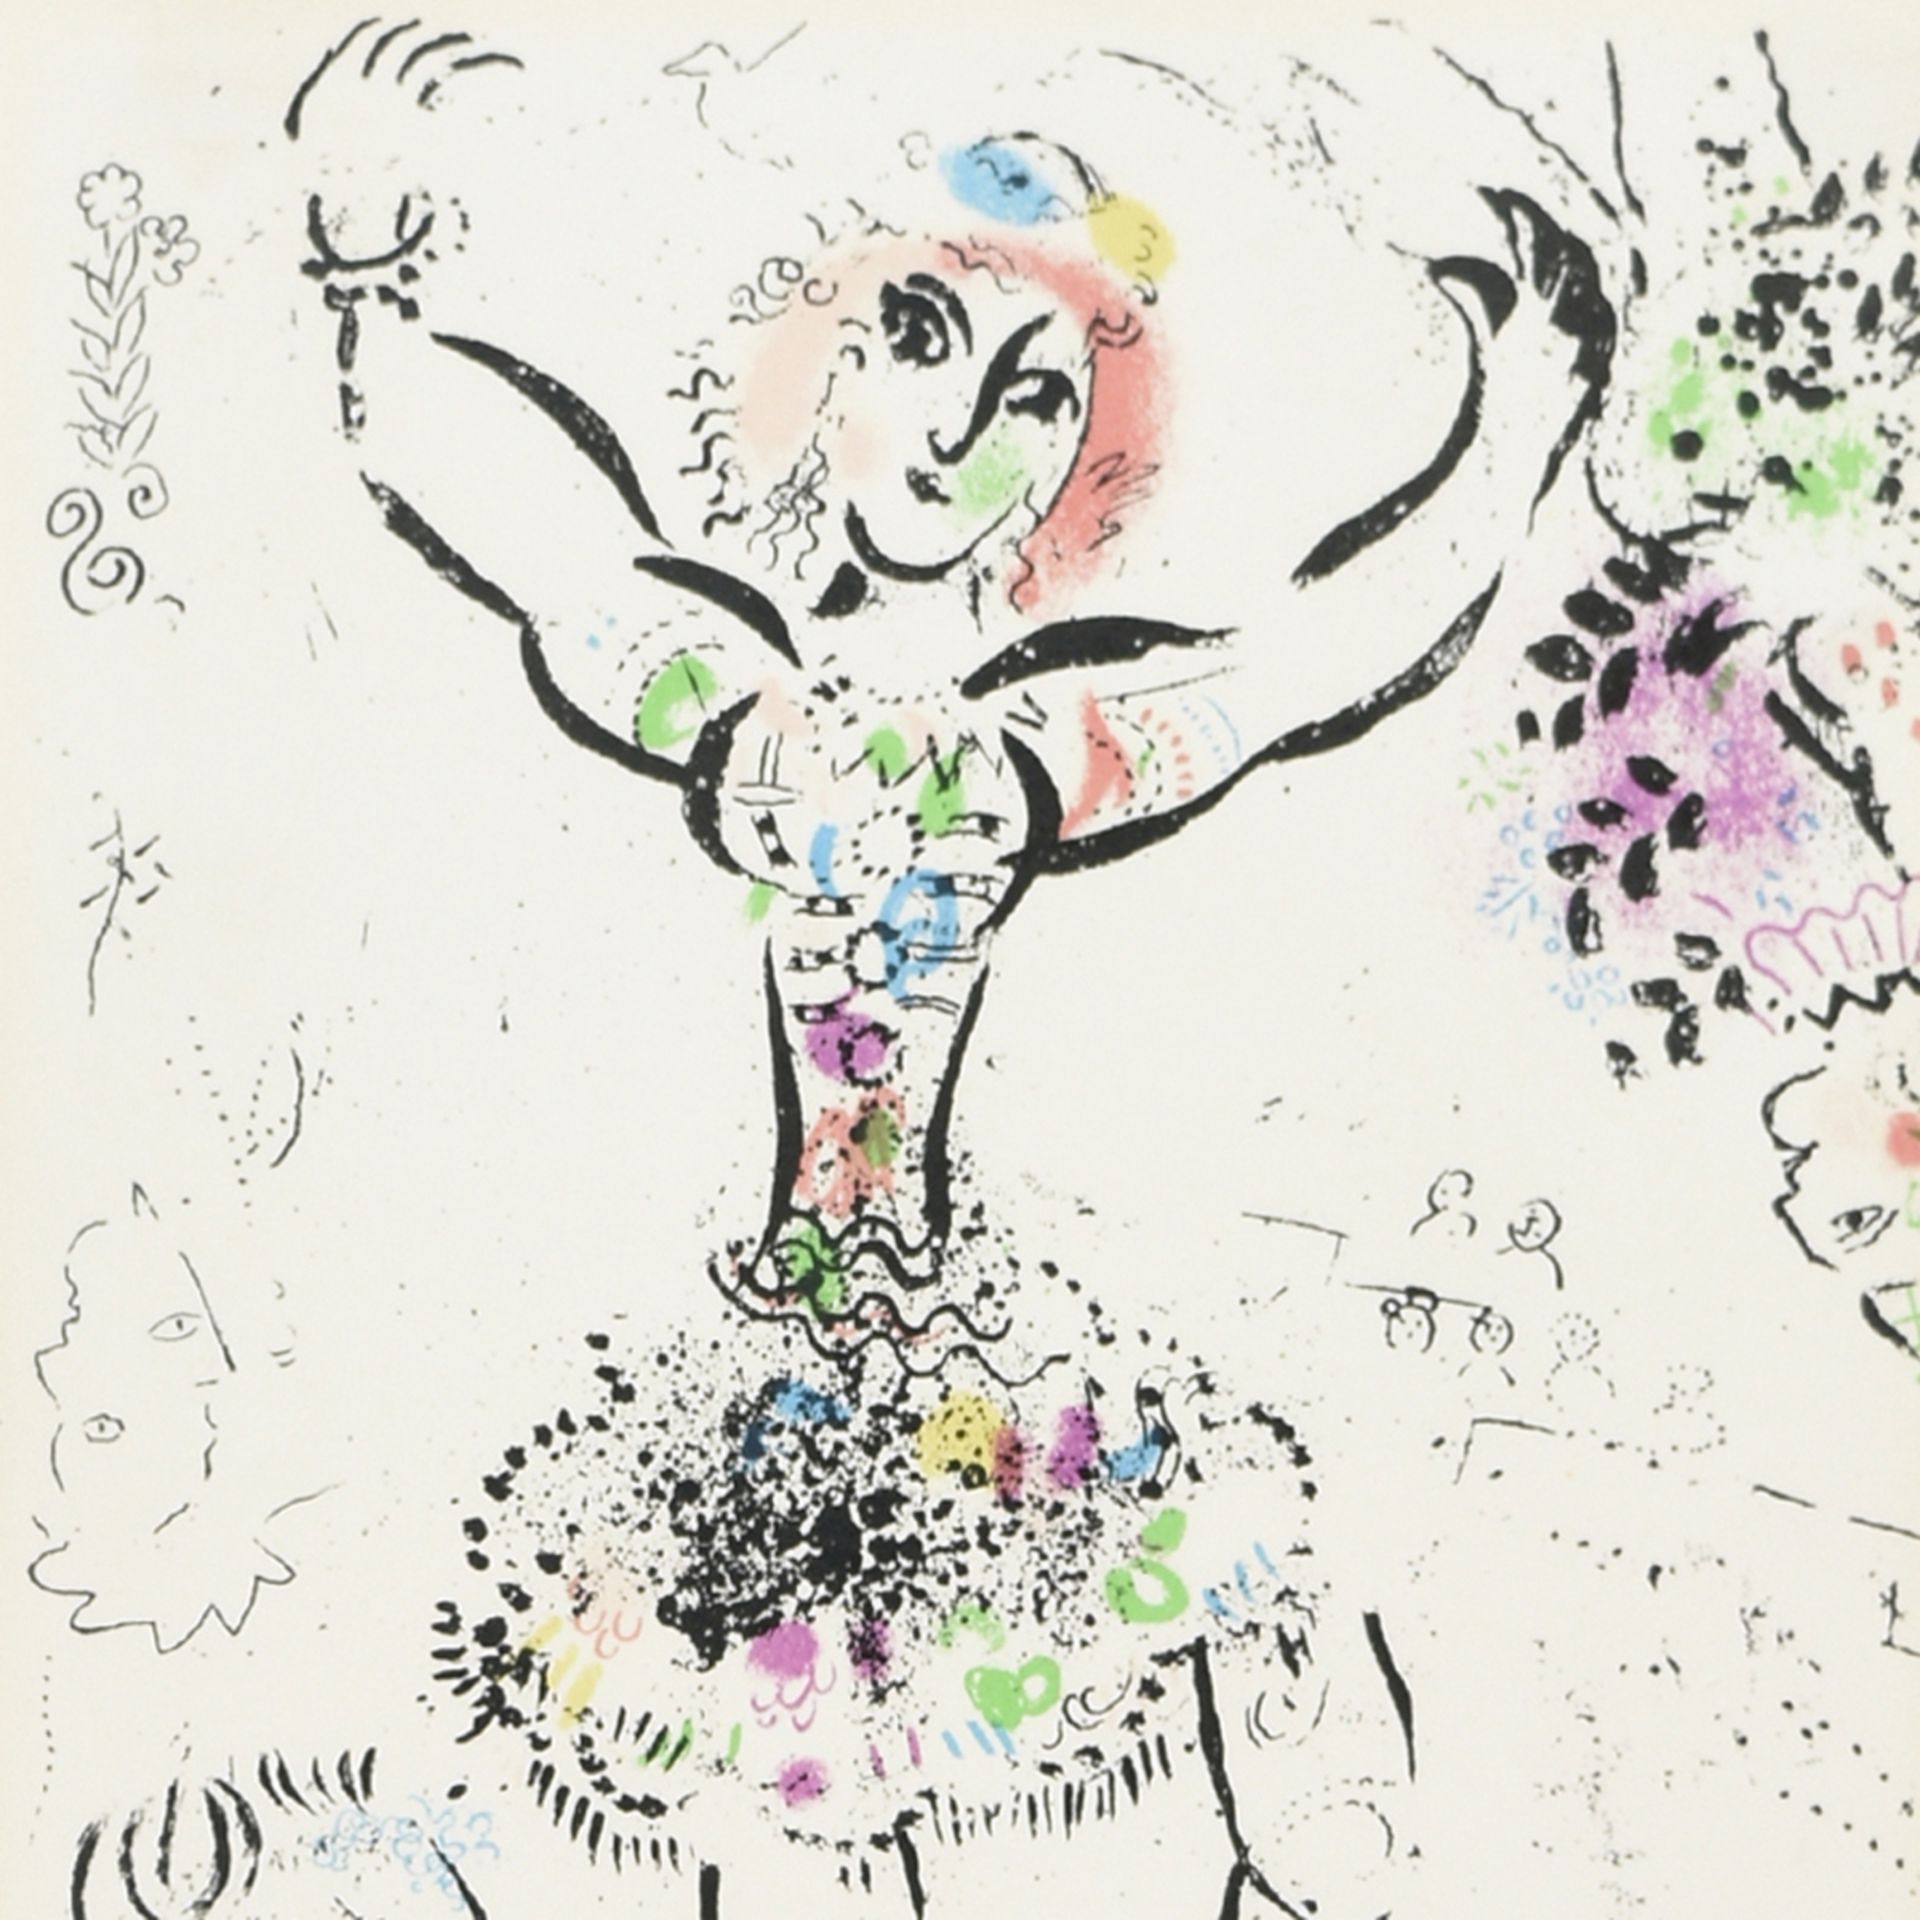 Chagall, Marc (1887 Witebsk - 1985 Vence)